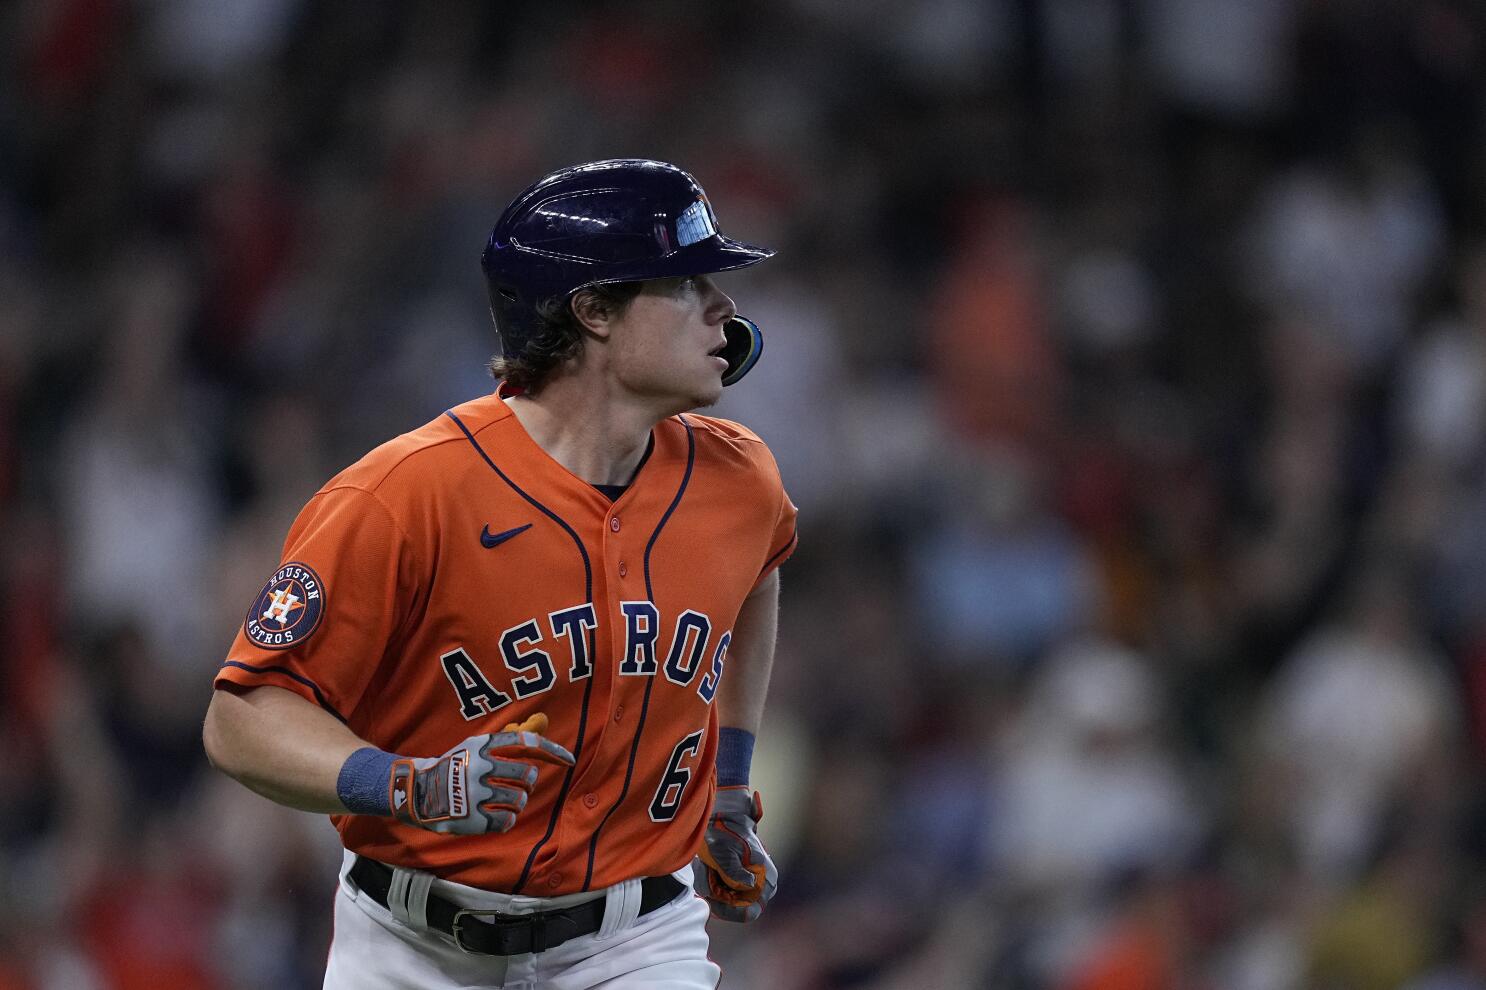 Meyers homers as Astros avoid sweep with 4-3 win over Phils - The